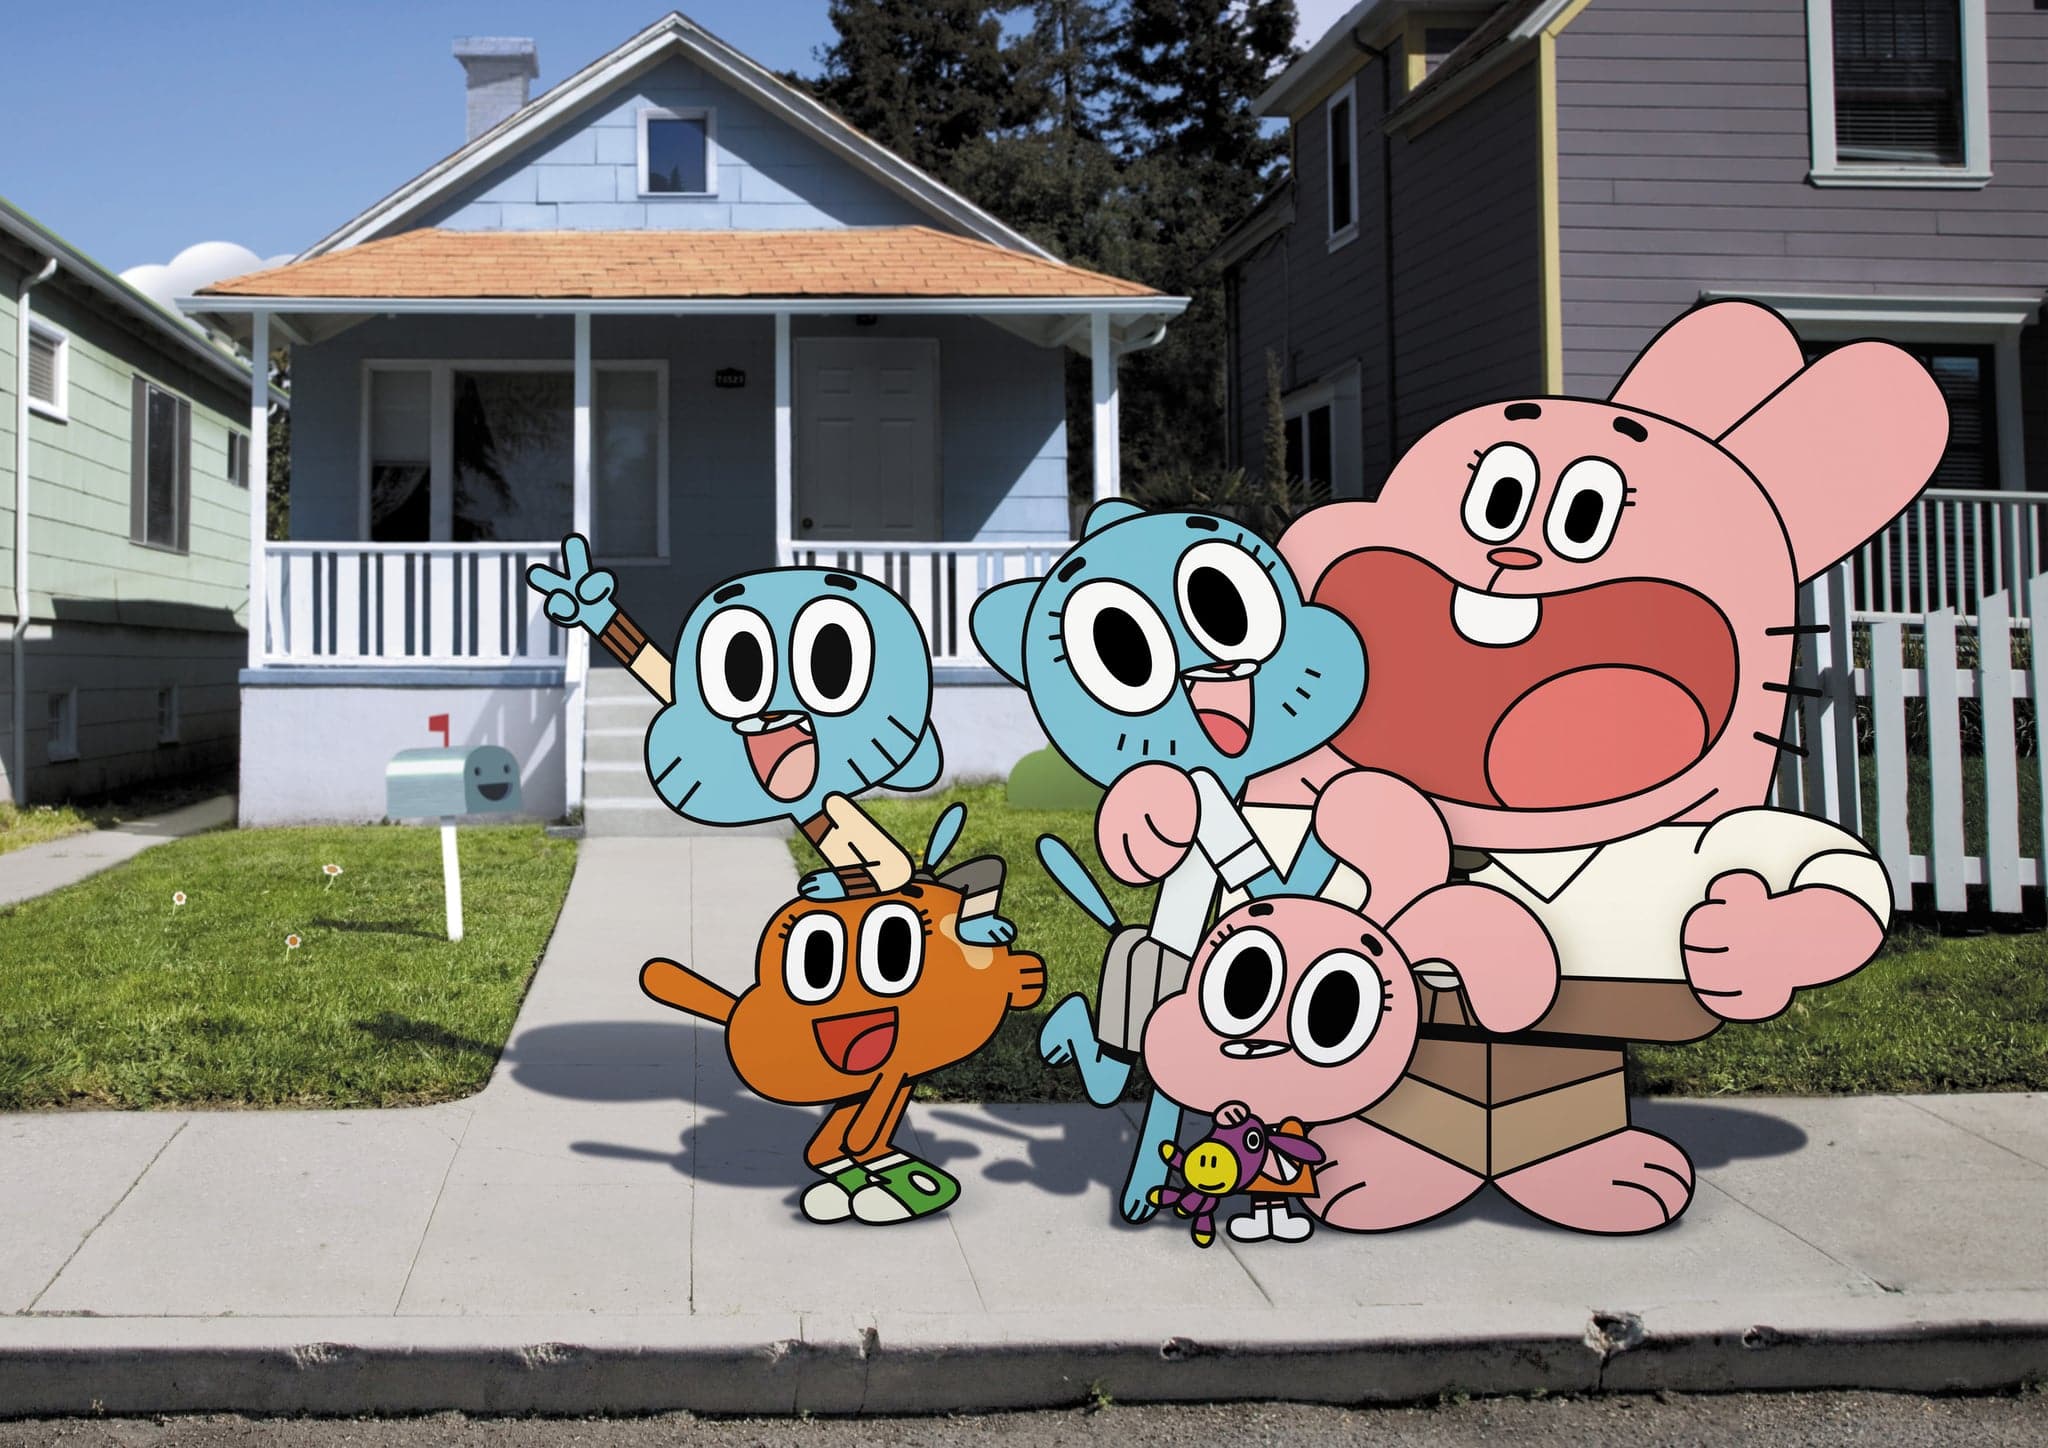 The Amazing World of Gumball Gets a Movie and New Series on HBO Max